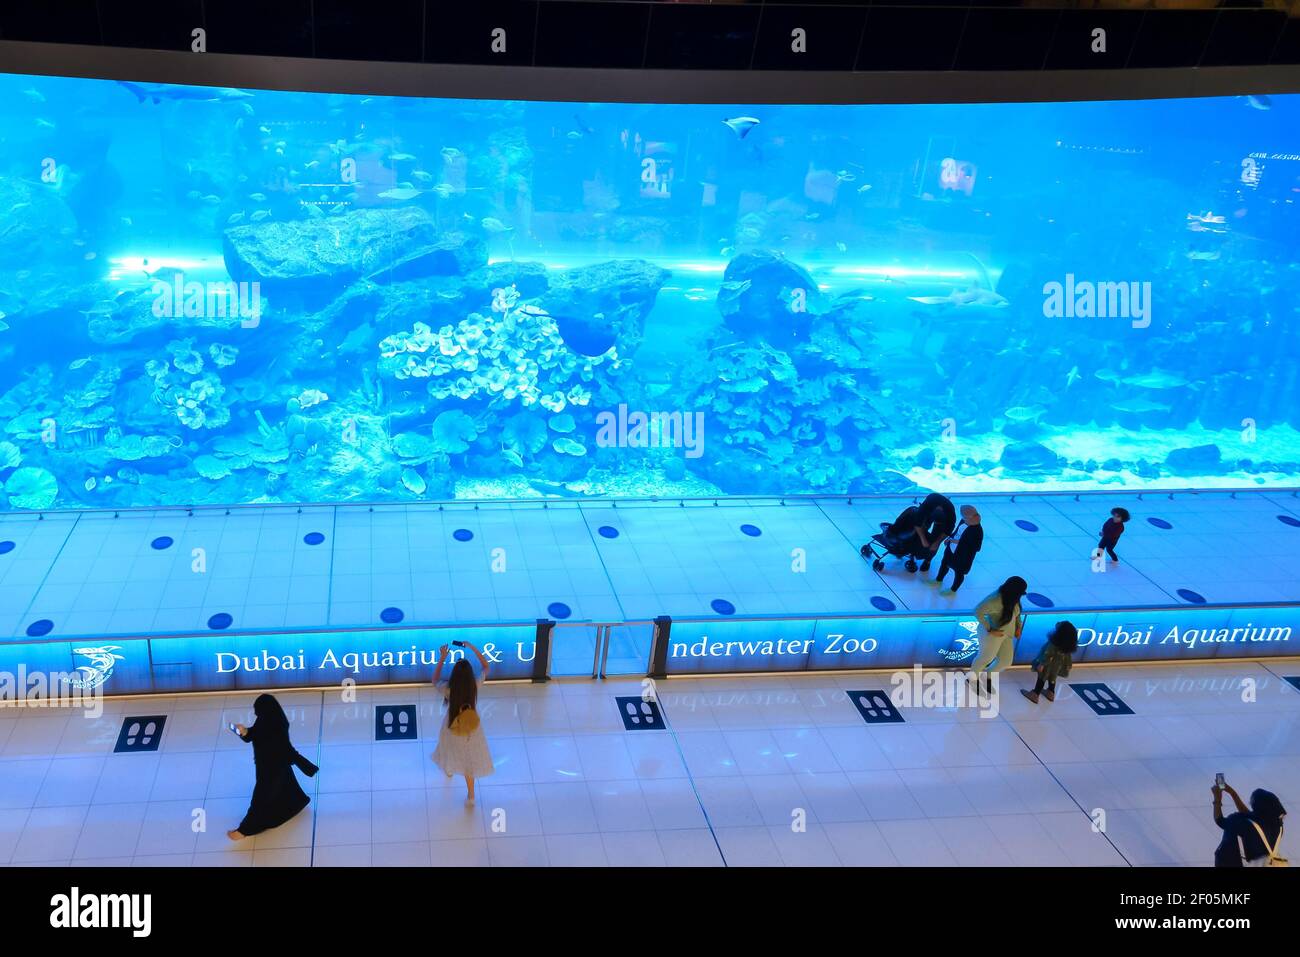 Dubai Aquarium and Underwater Zoo in The Dubai Mall. Ground marks for tourists to practice social distancing travelling during Coronavirus pandemic. Stock Photo